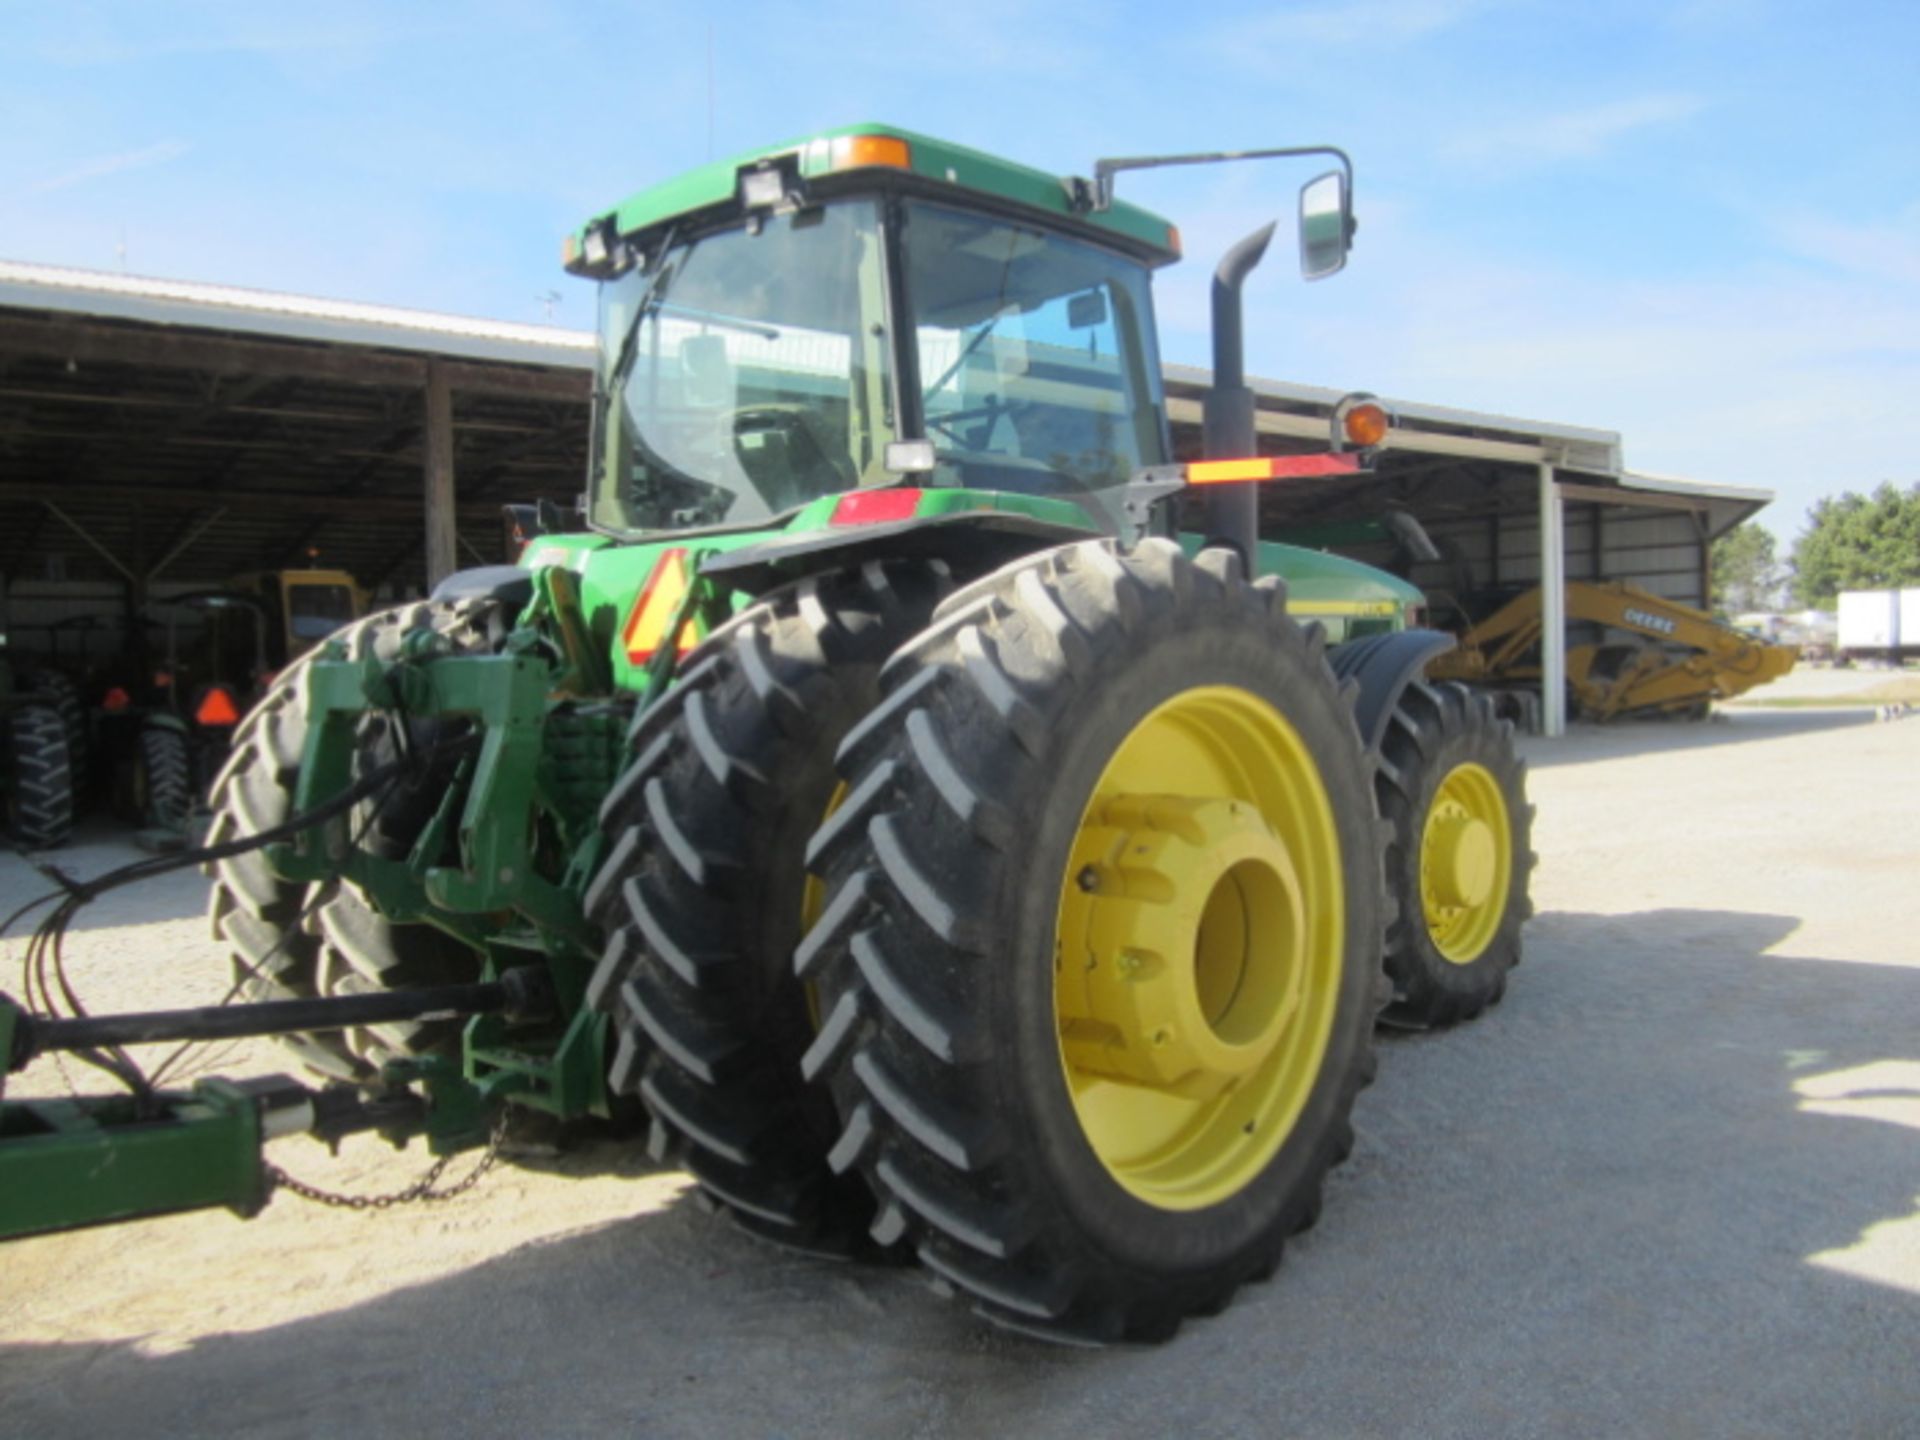 Lot 11: 2000 John Deere 8410 FWA tractor, 5,243 hrs, Michelin front tires 16.9R30 90% Michelin - Image 4 of 4